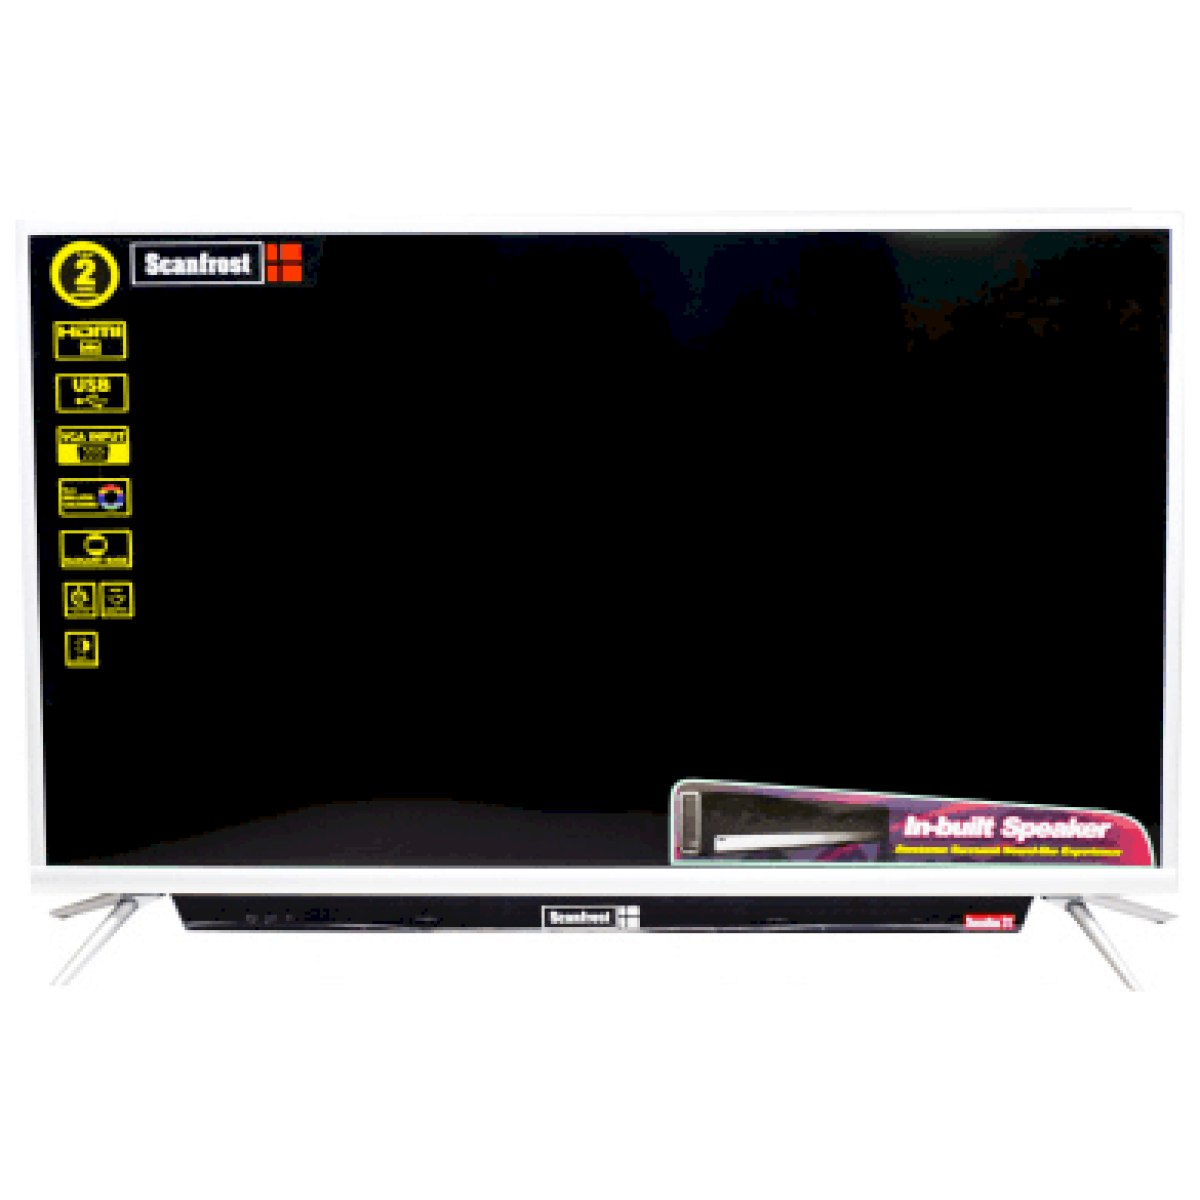 Scanfrost LED TV SFLED 32AS with Silver Aluminum FrameSilver Metal Base SFLED32AS